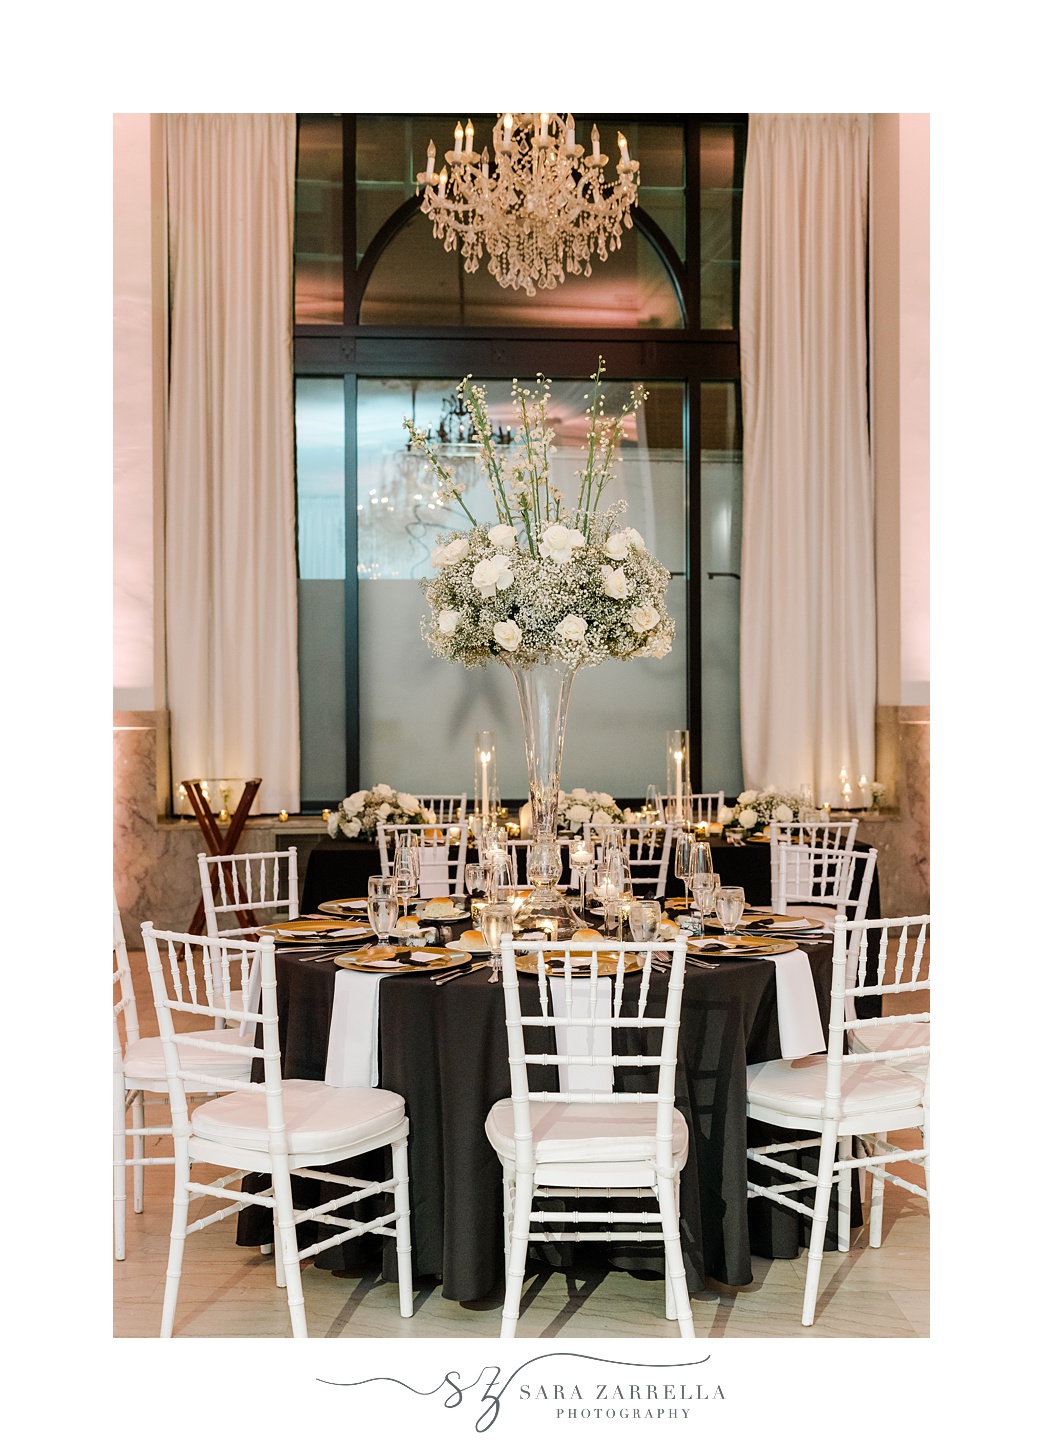 reception table with white flowers for New Year's Eve wedding reception at the Providence G